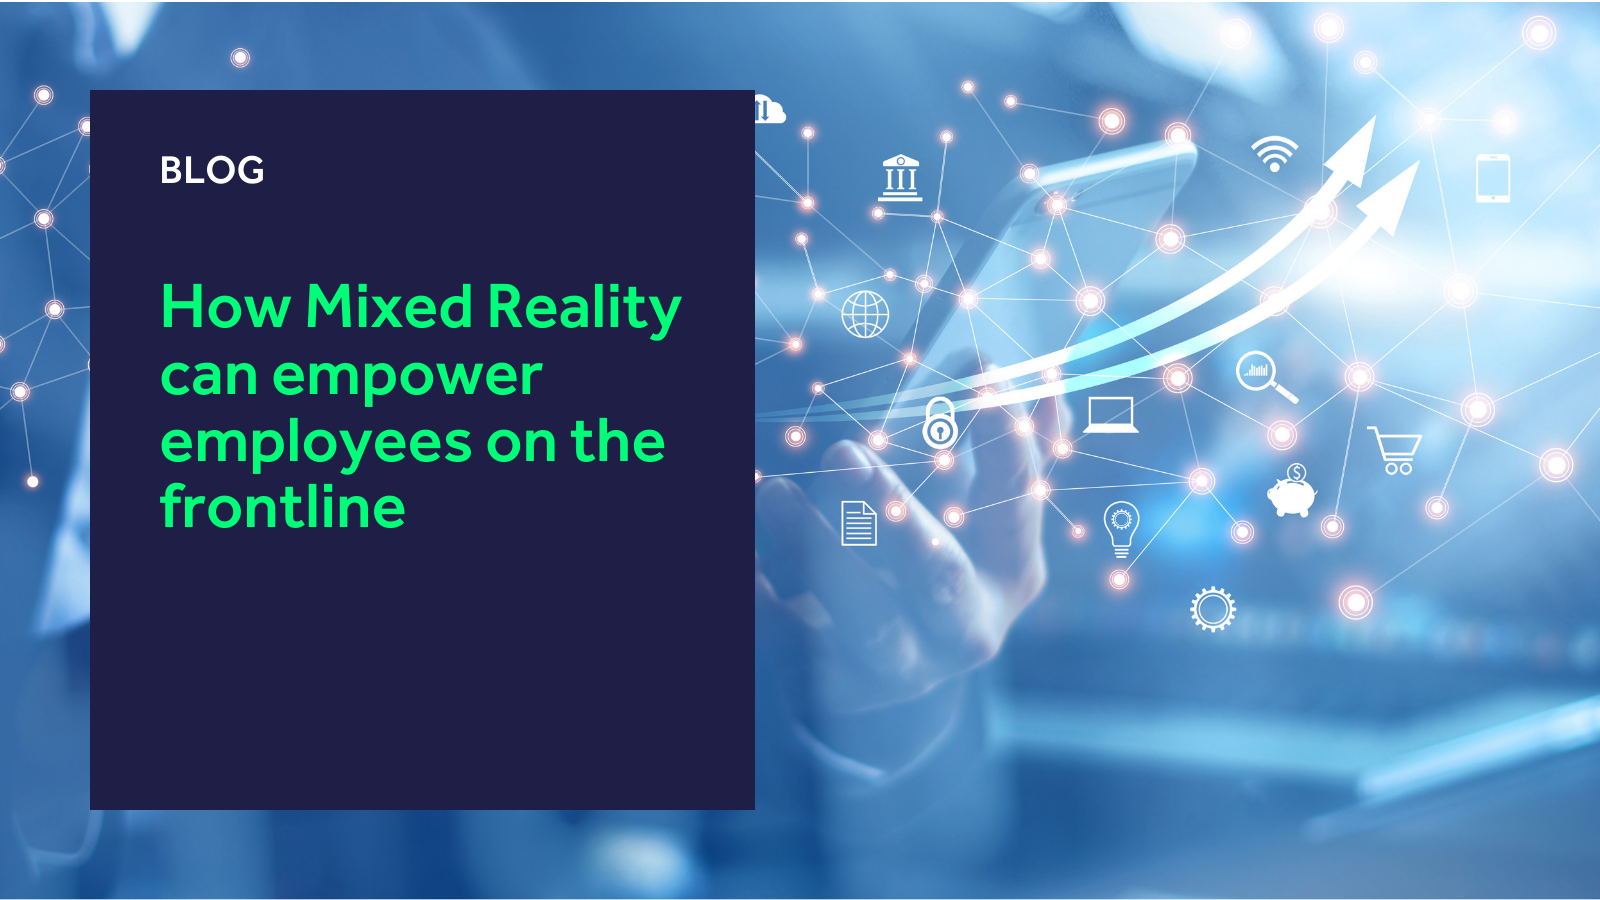 How Mixed Reality can empower employees on the frontline